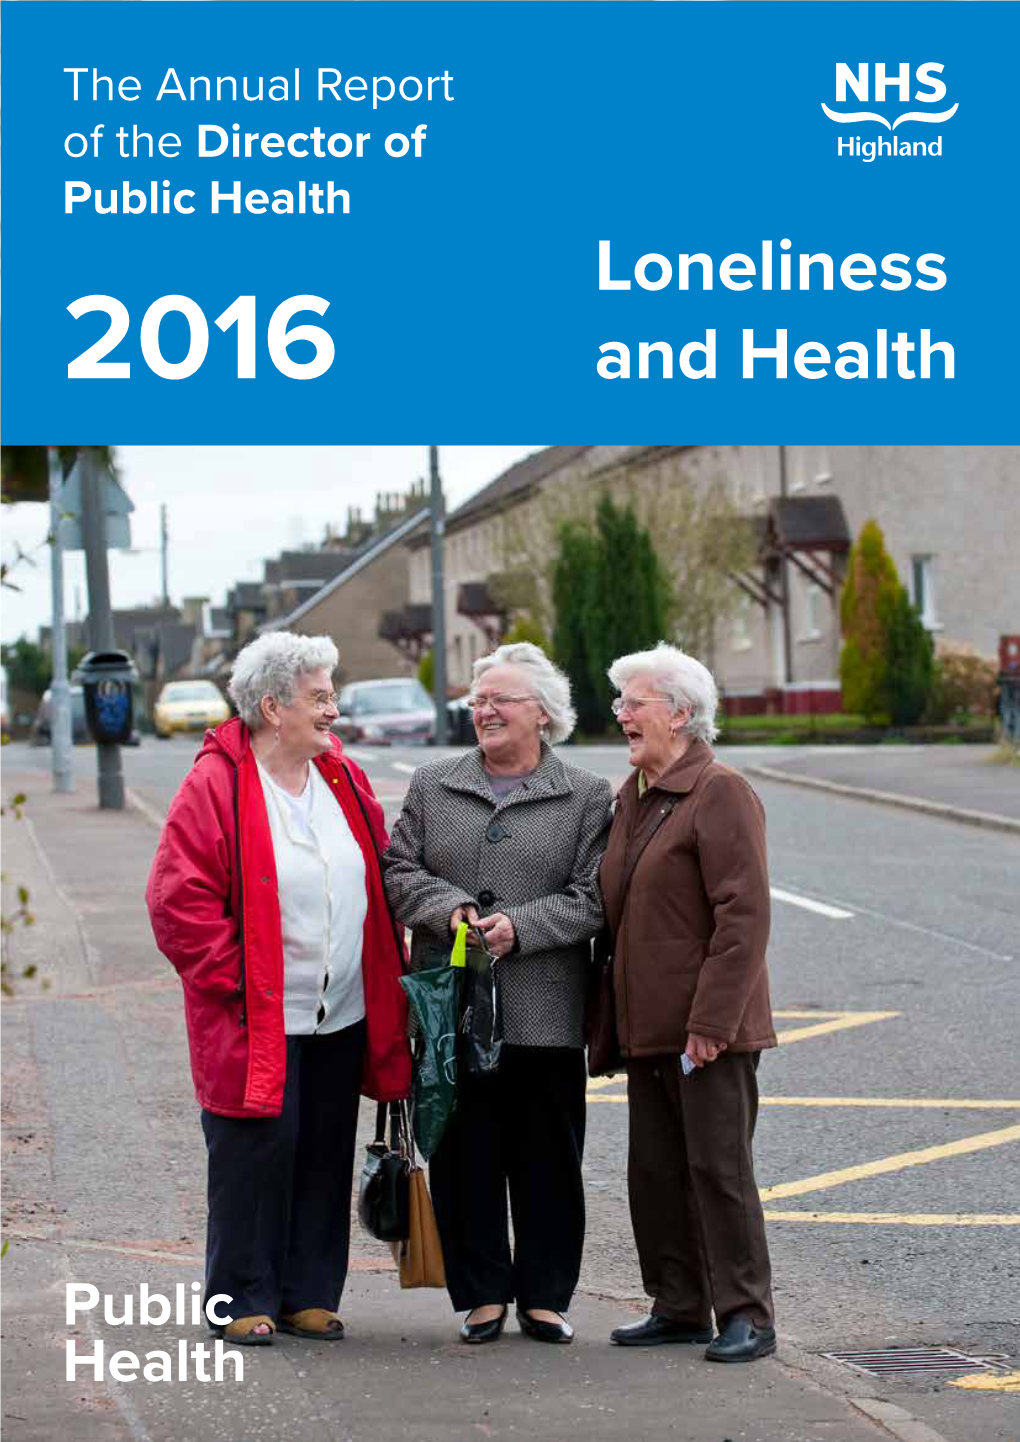 Loneliness and Health